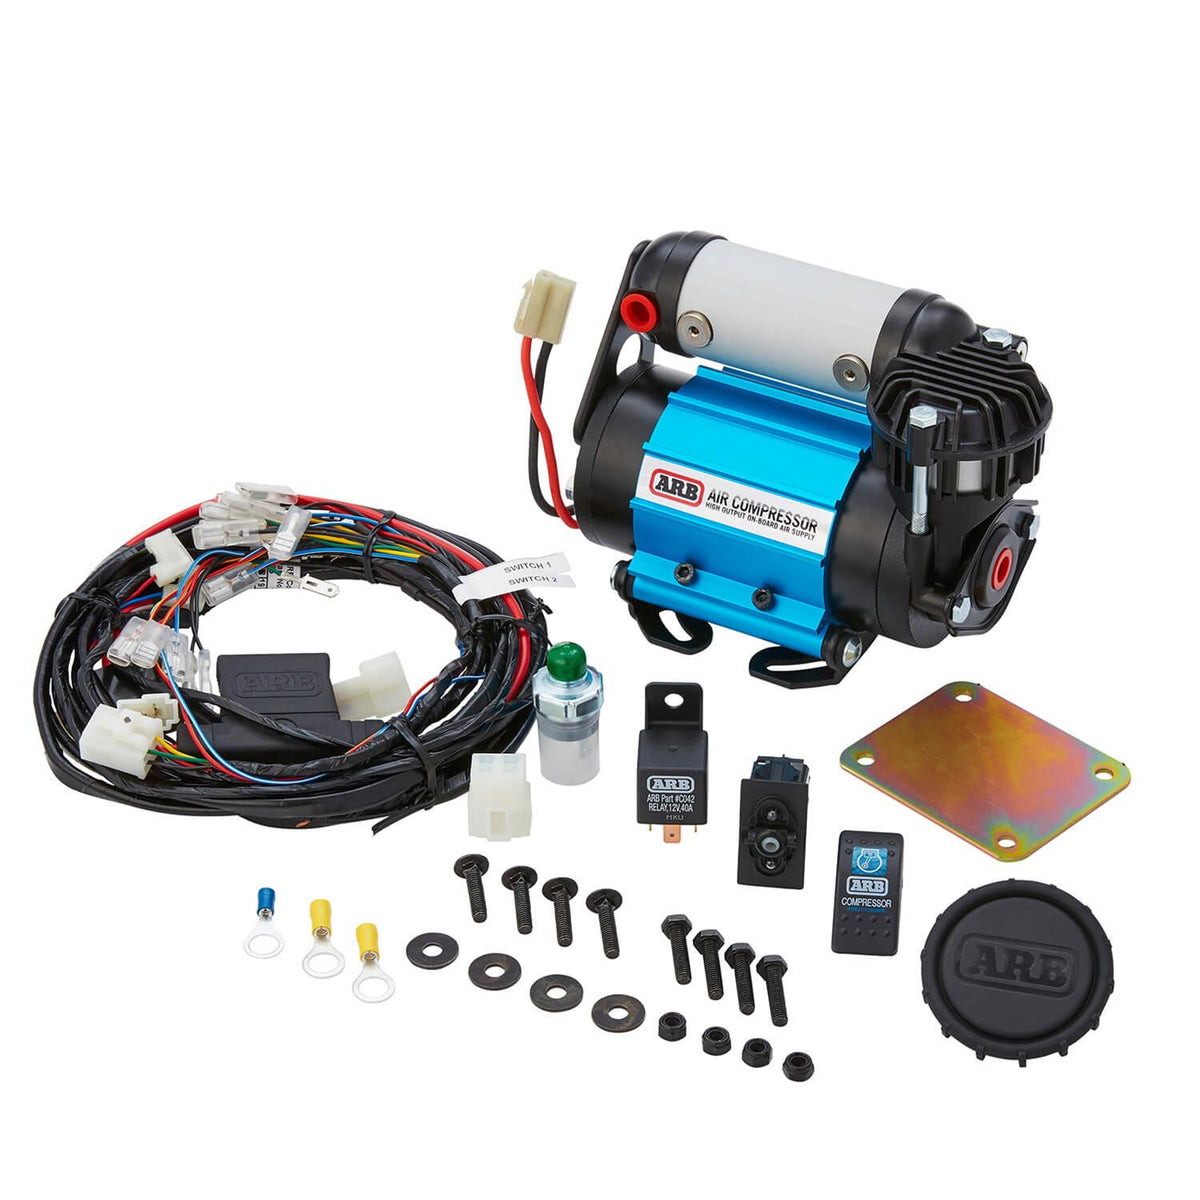 ARB Air Compressor; High Output; On-Board; 12V - Offroad Outfitters